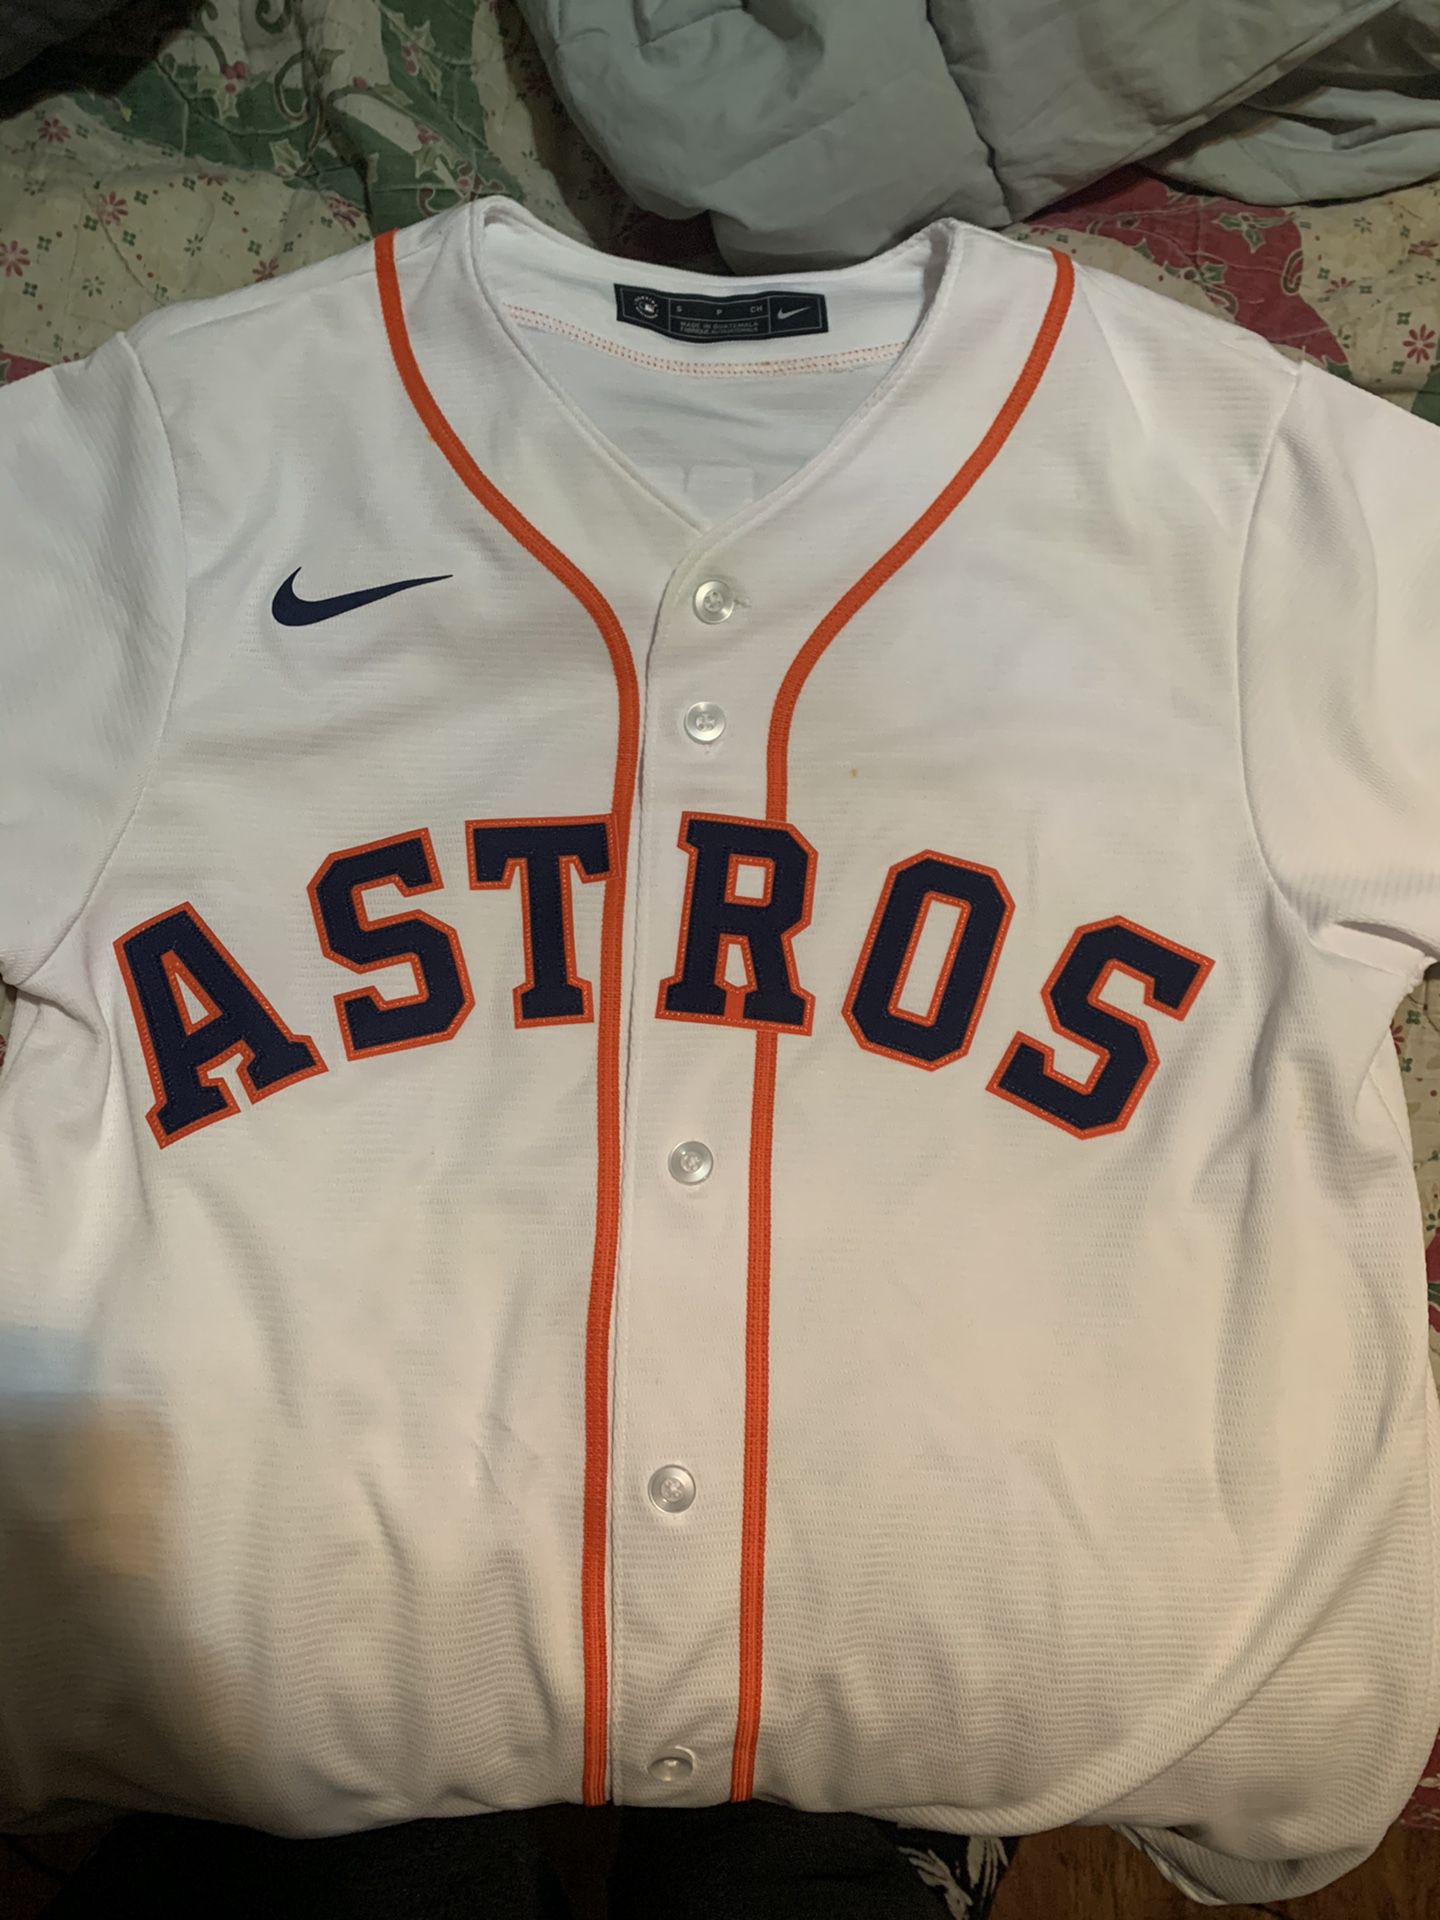 Astros size small fits like a medium I’m not sure